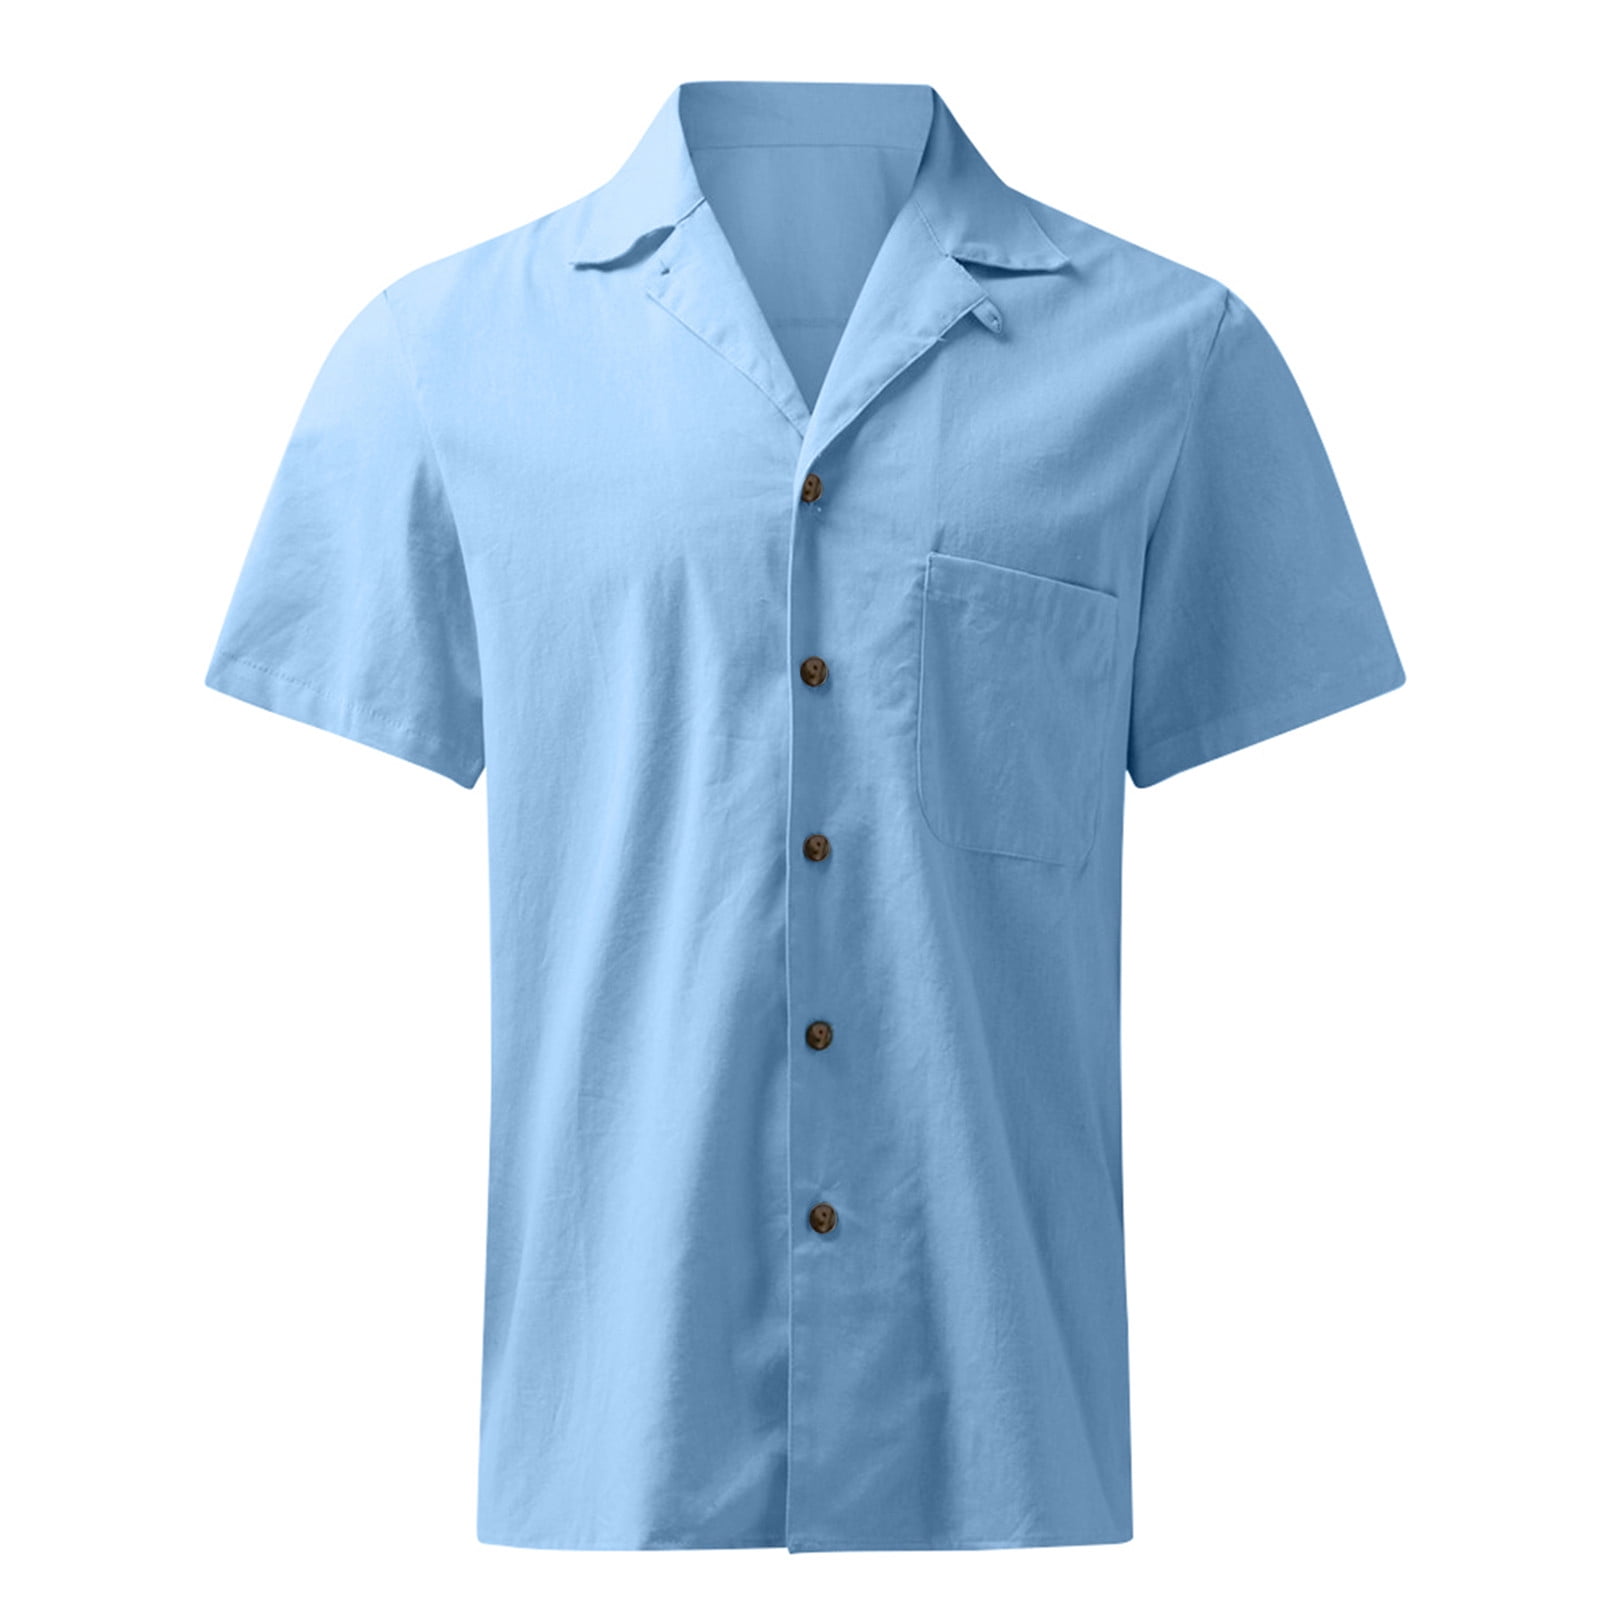 Men's Casual Short Sleeve Dress Shirts Regular Fit Button Down Beach Solid  Tops Spread Collar Summer Blouses With Pocket 